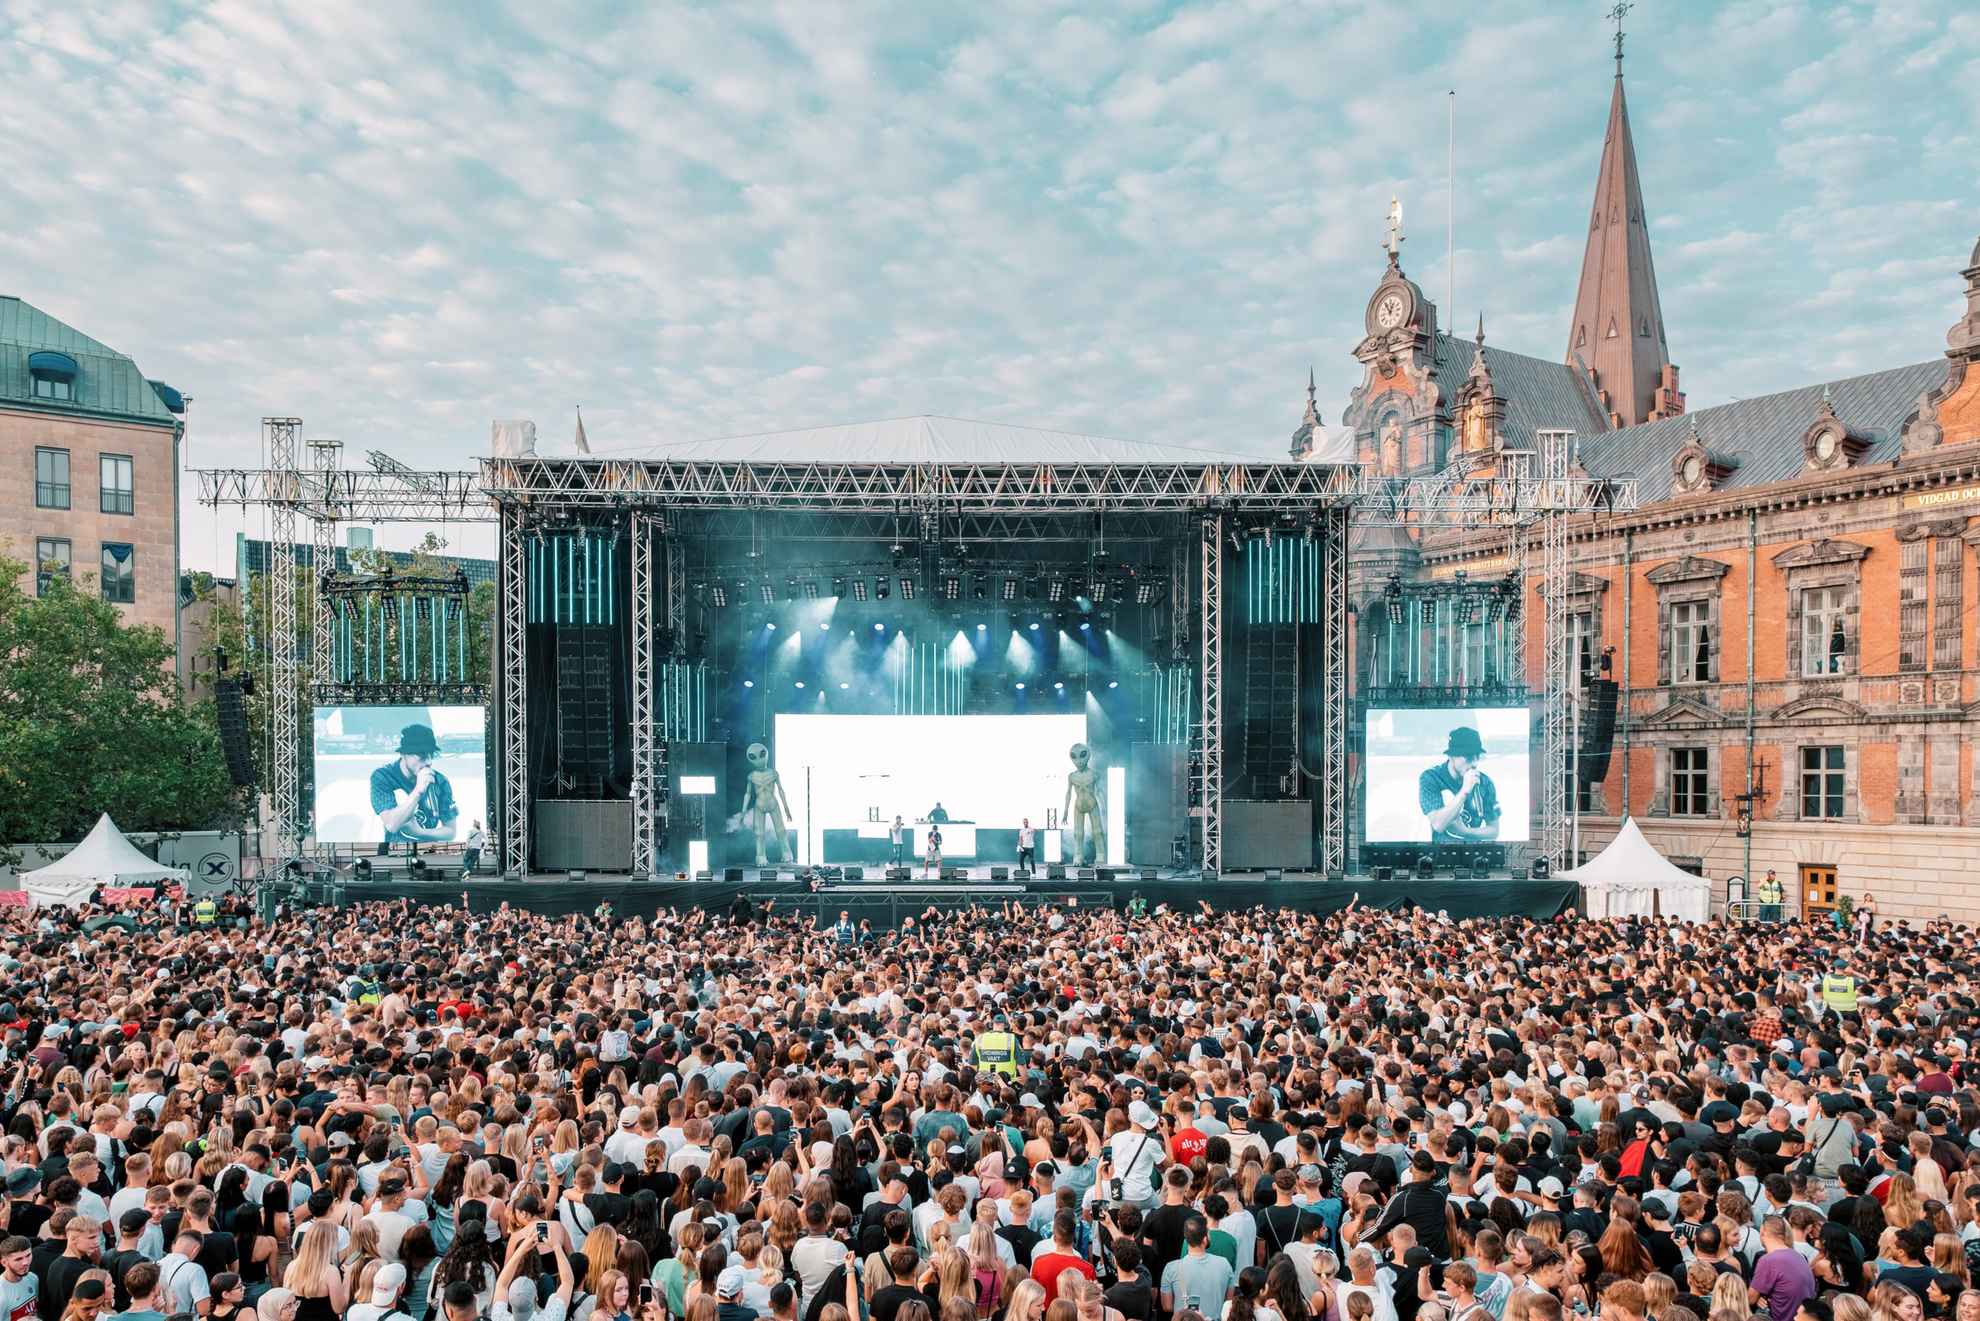 A big crowd in front of a stage at Malmöfestivalen.